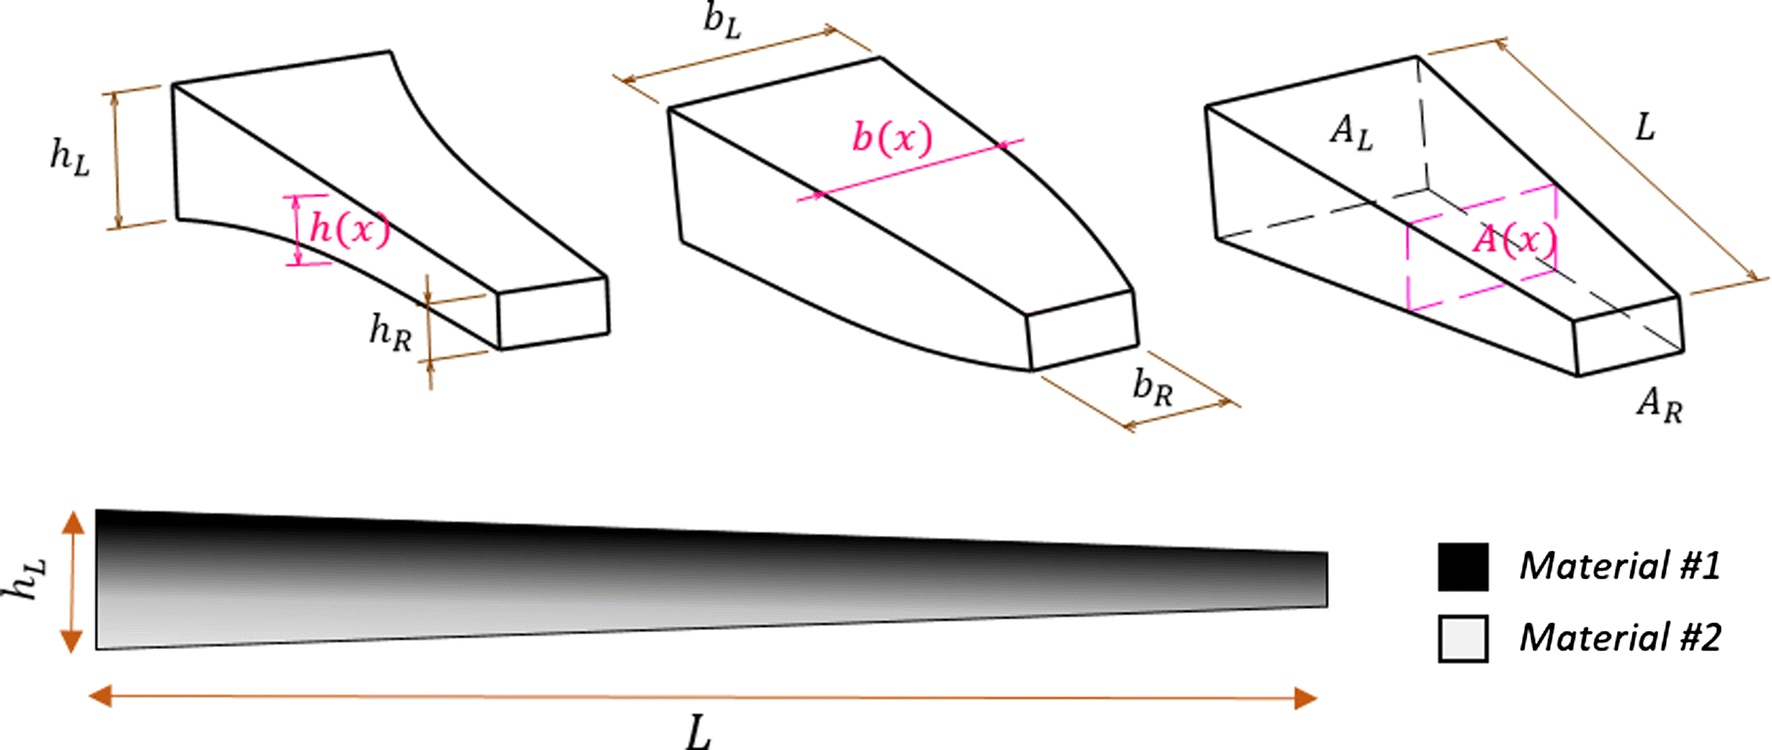 Bending Buckling And Vibration Analysis Of Functionally Graded